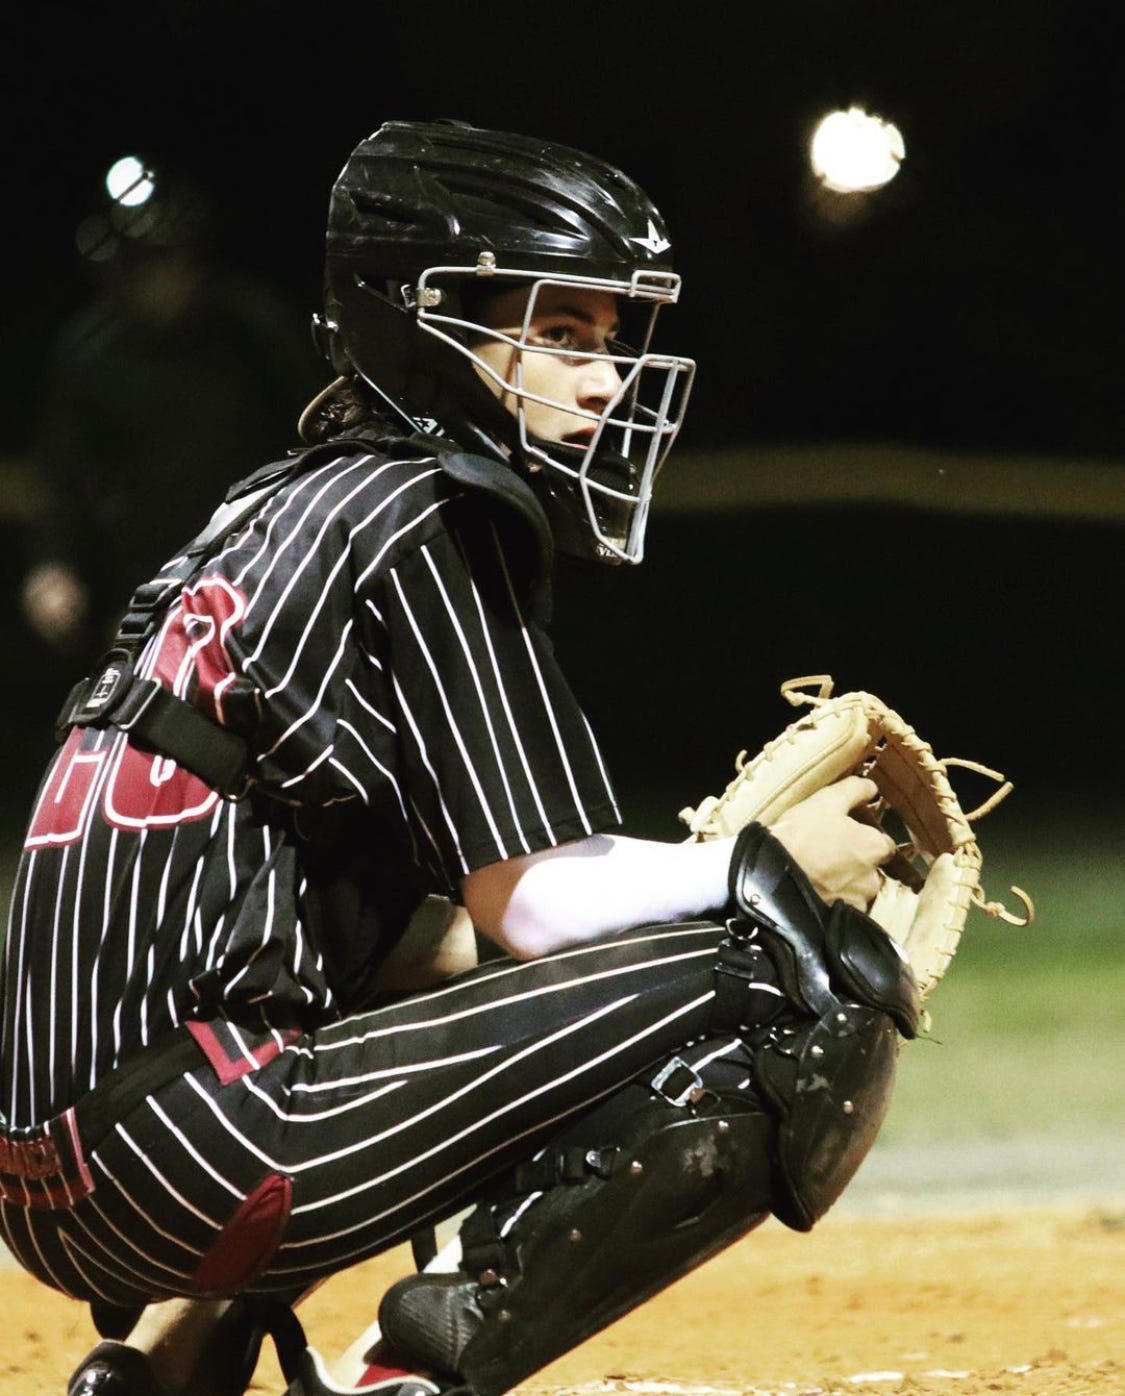 Palm Beach Central baseball hoping to injuries, return to